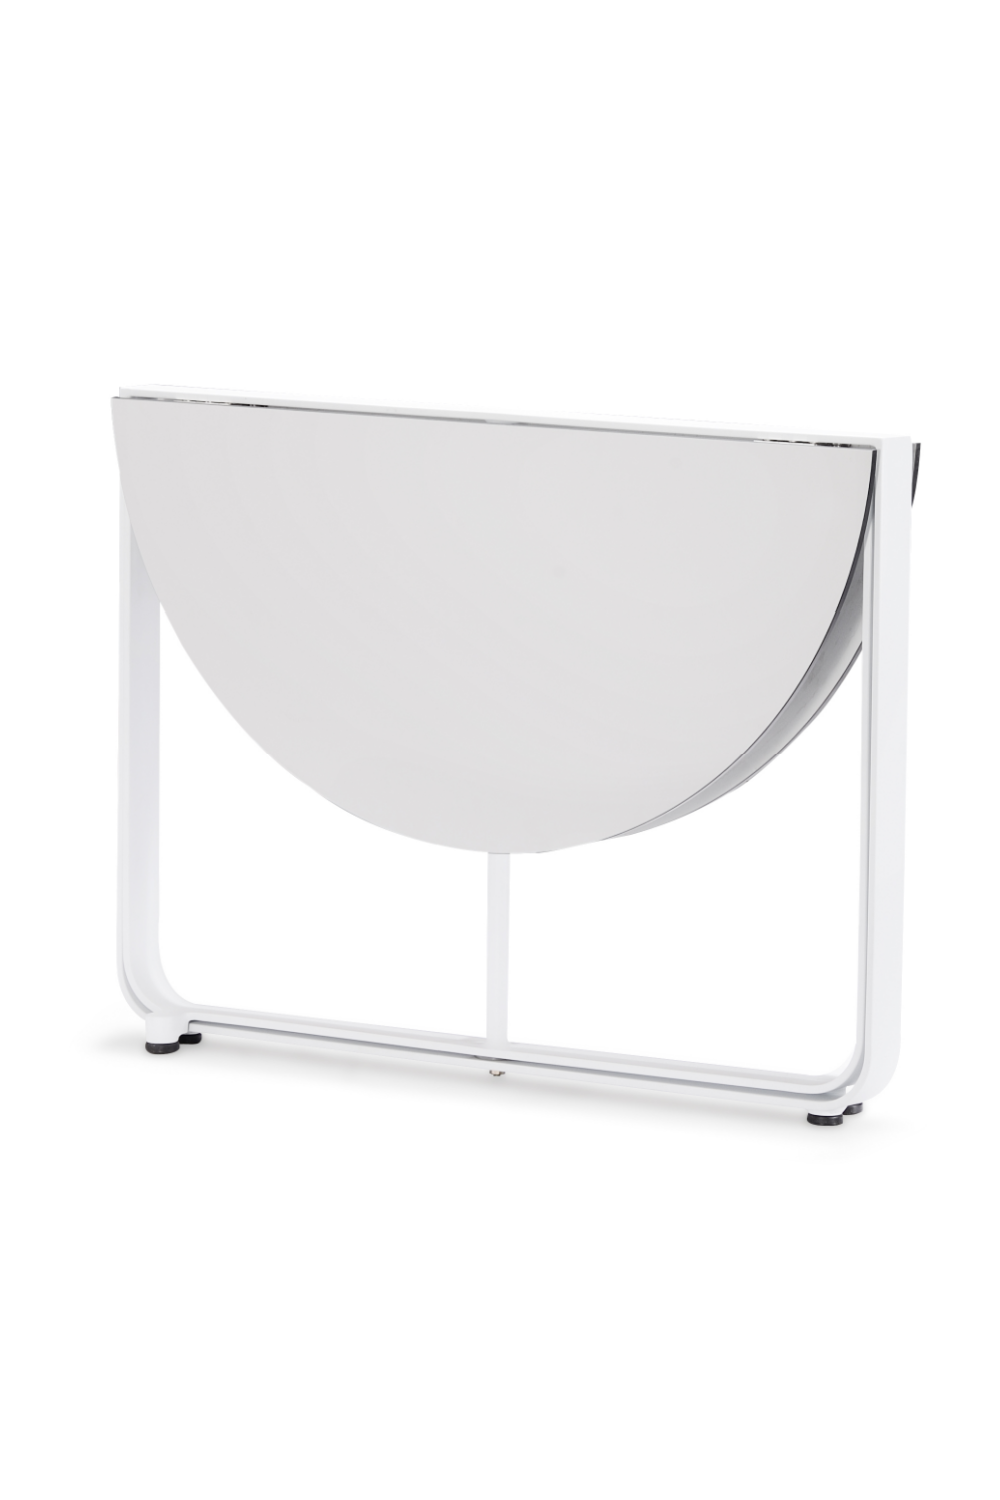 White Outdoor Round Table | Higold Clint | Oroa.com